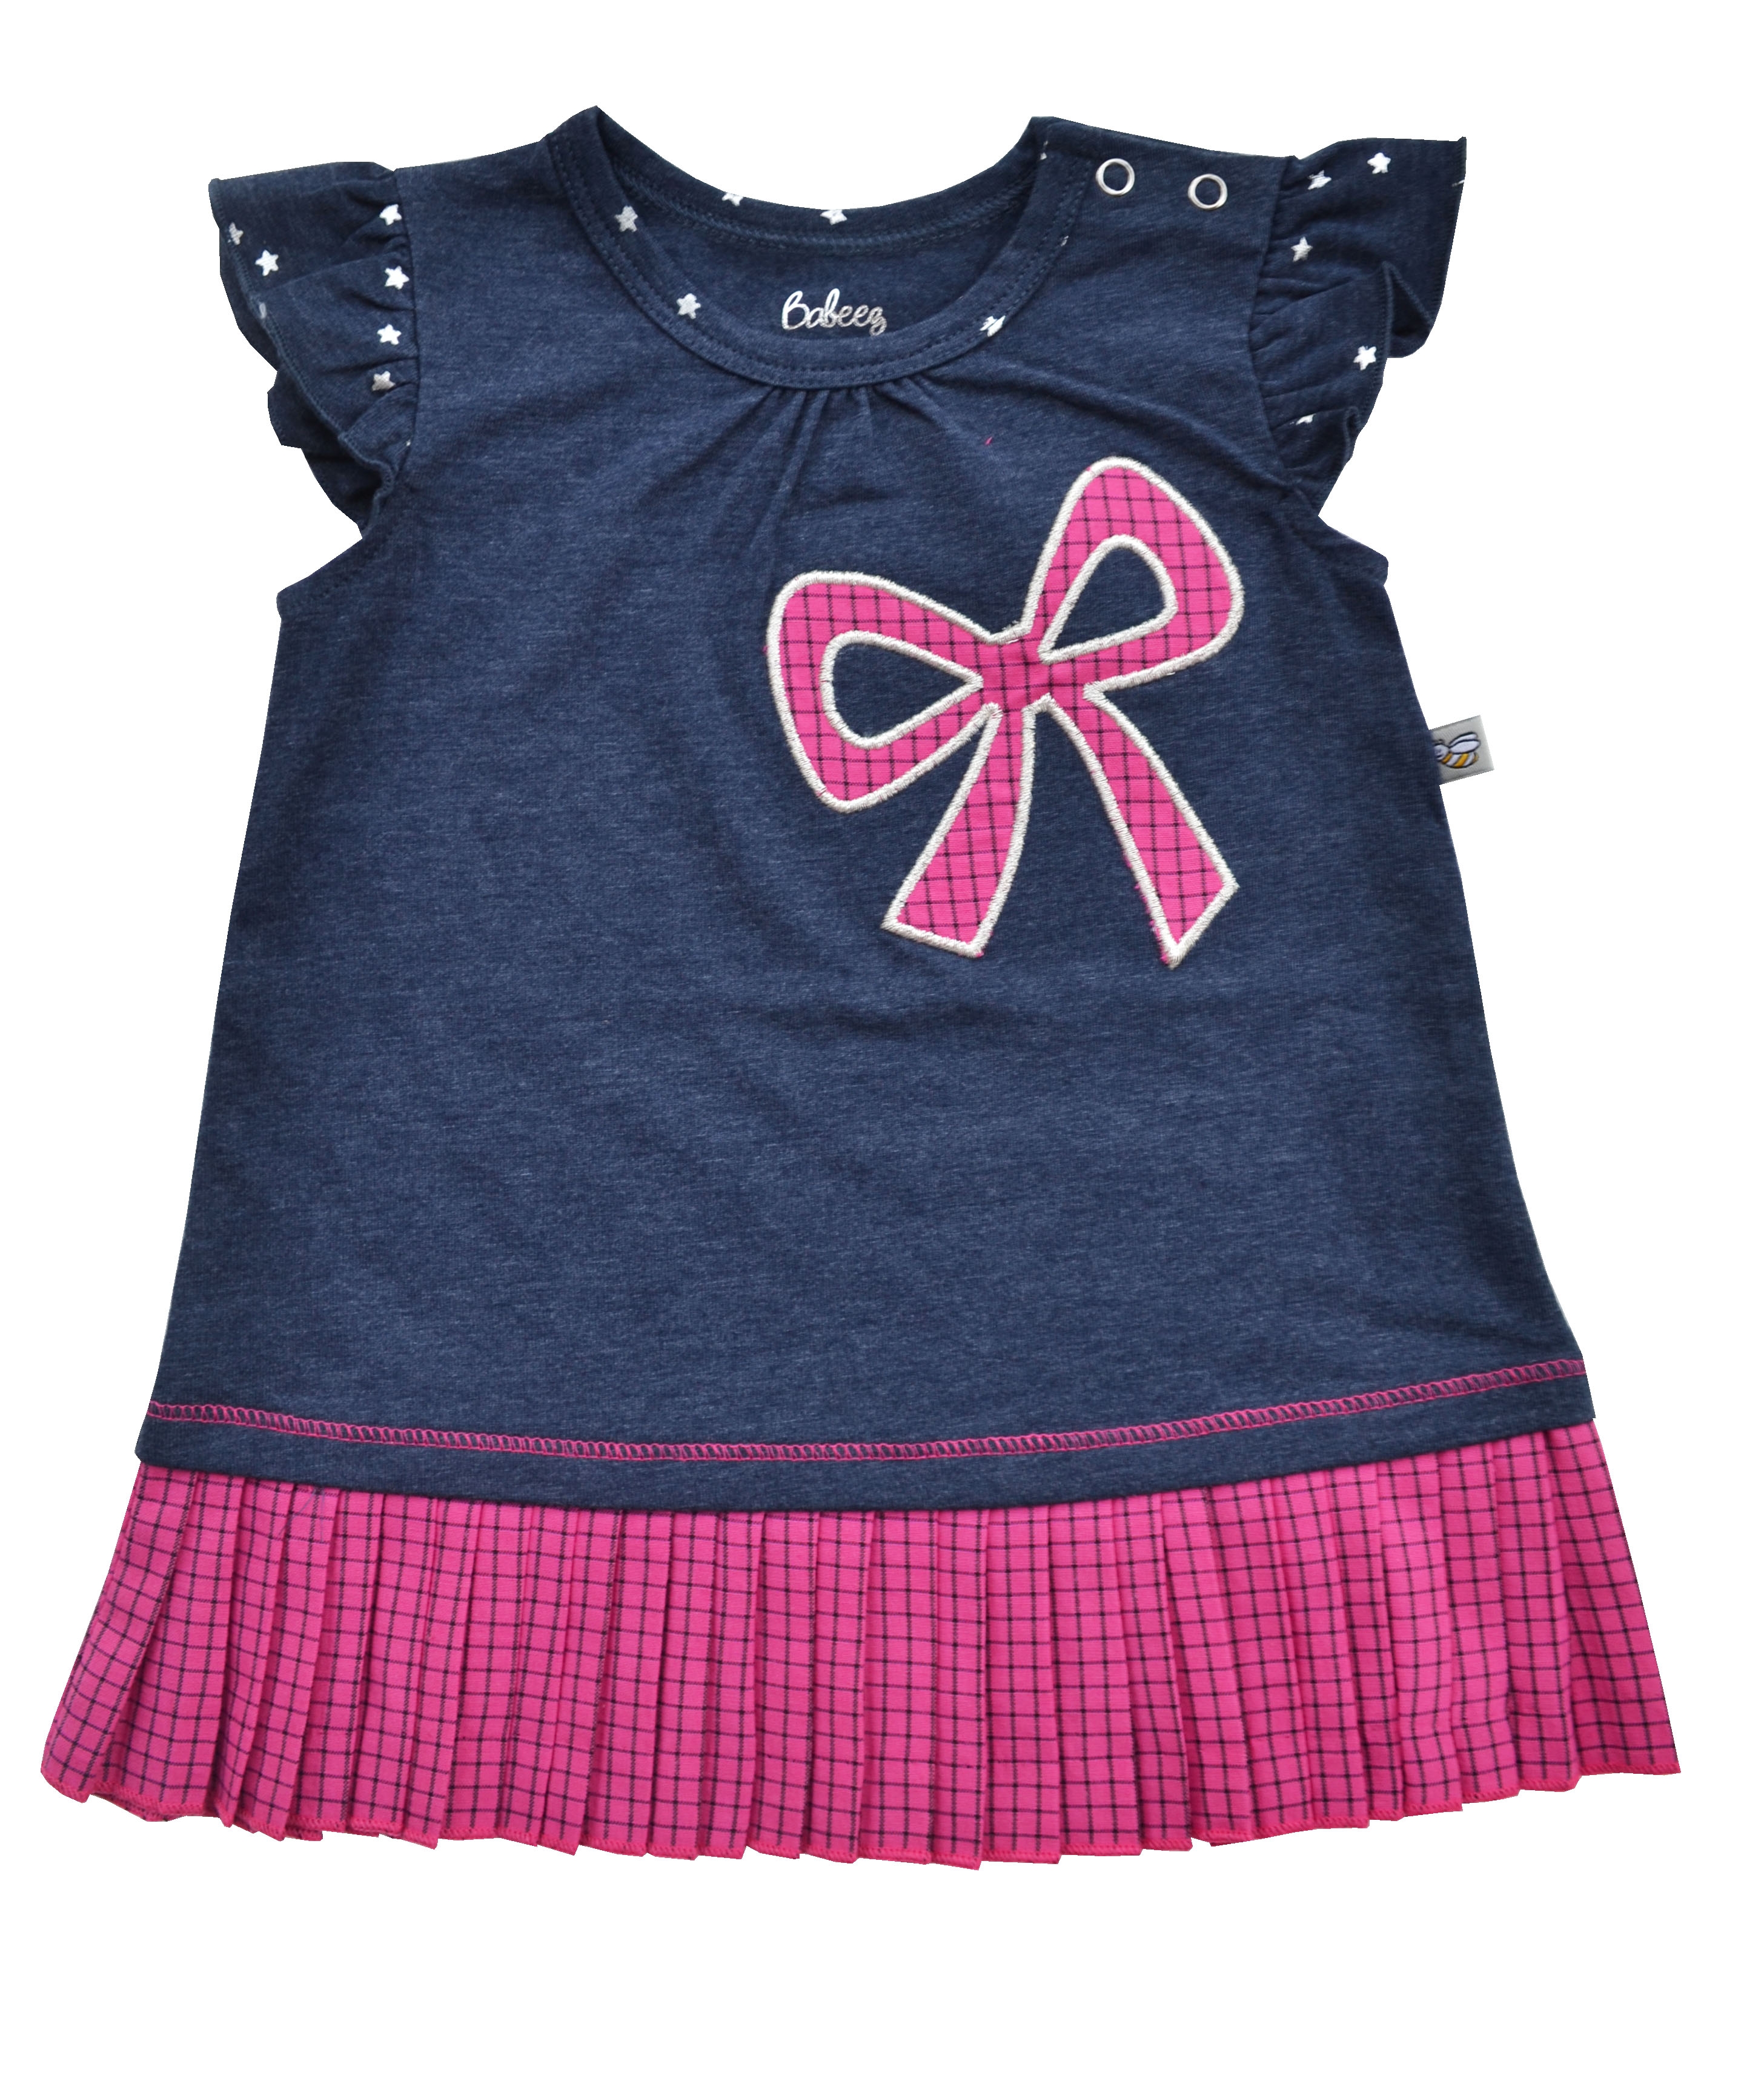 Denim Blue Dress with Pink Bow Applique (60% Cotton 35% Polyester 5% Elasthan)